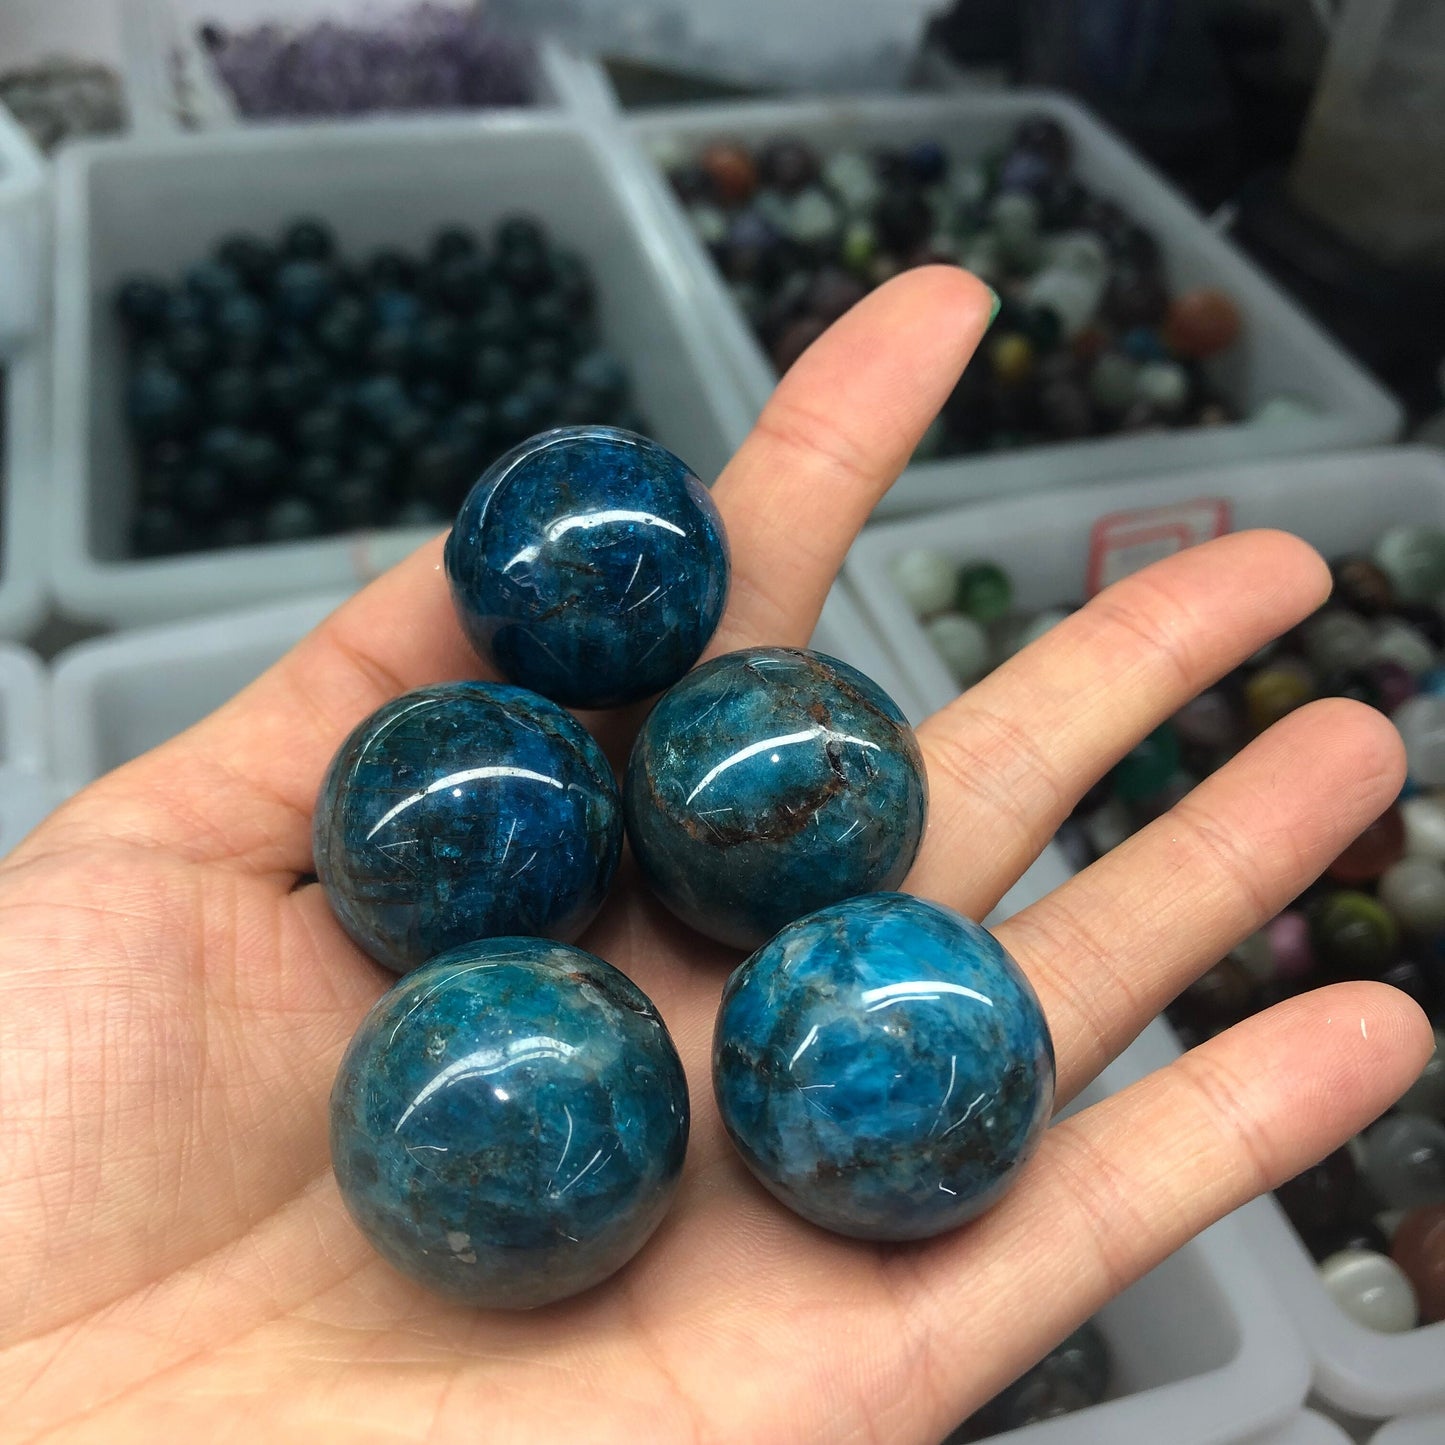 Natural Blue Apatite Stone Quartz Sphere Crystals - Set of 10 for Healing, Reiki, Home Decor and Energy - Perfect Gift Idea